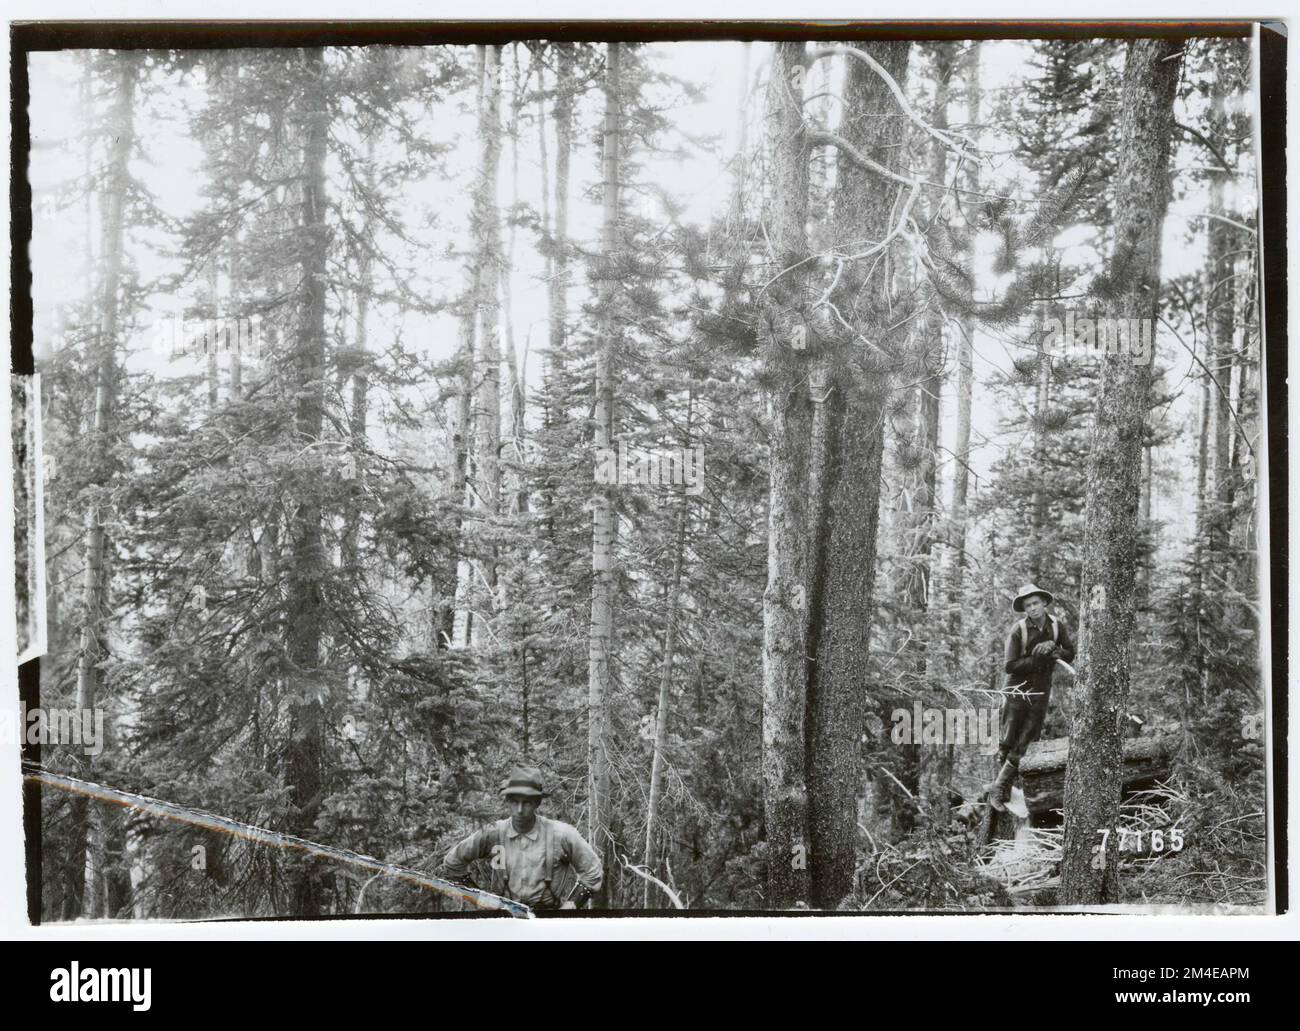 Logging: Marking. Photographs Relating to National Forests, Resource ...